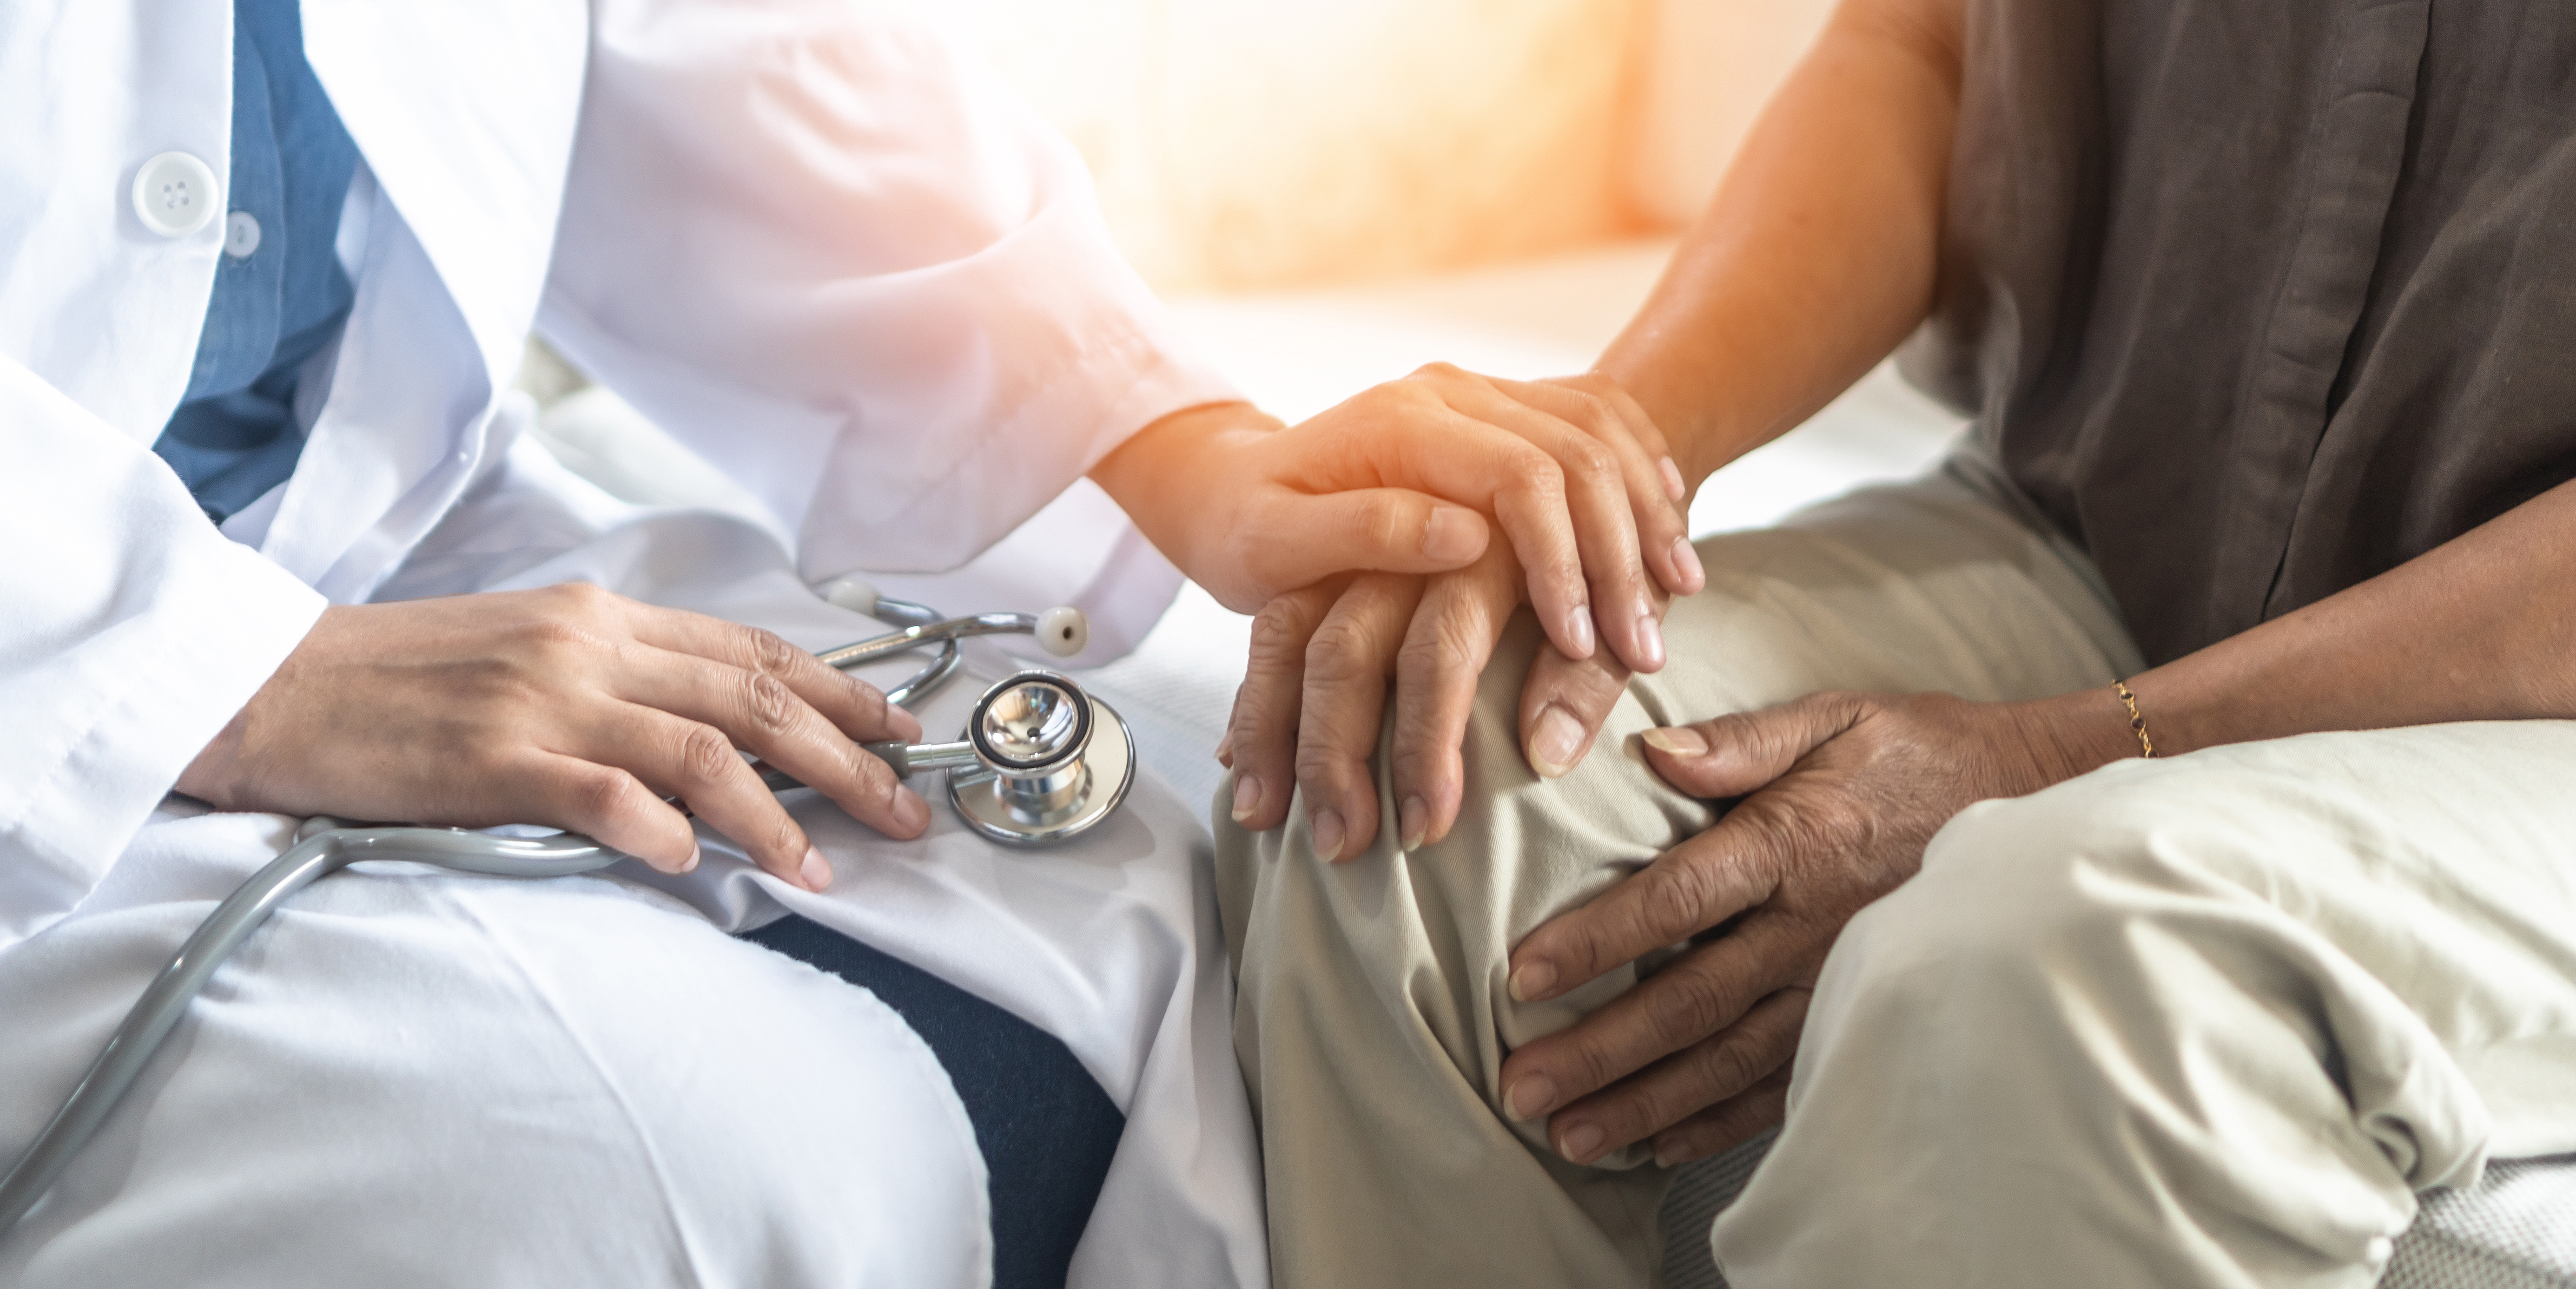 Making Authentic Patient Connections Seamless